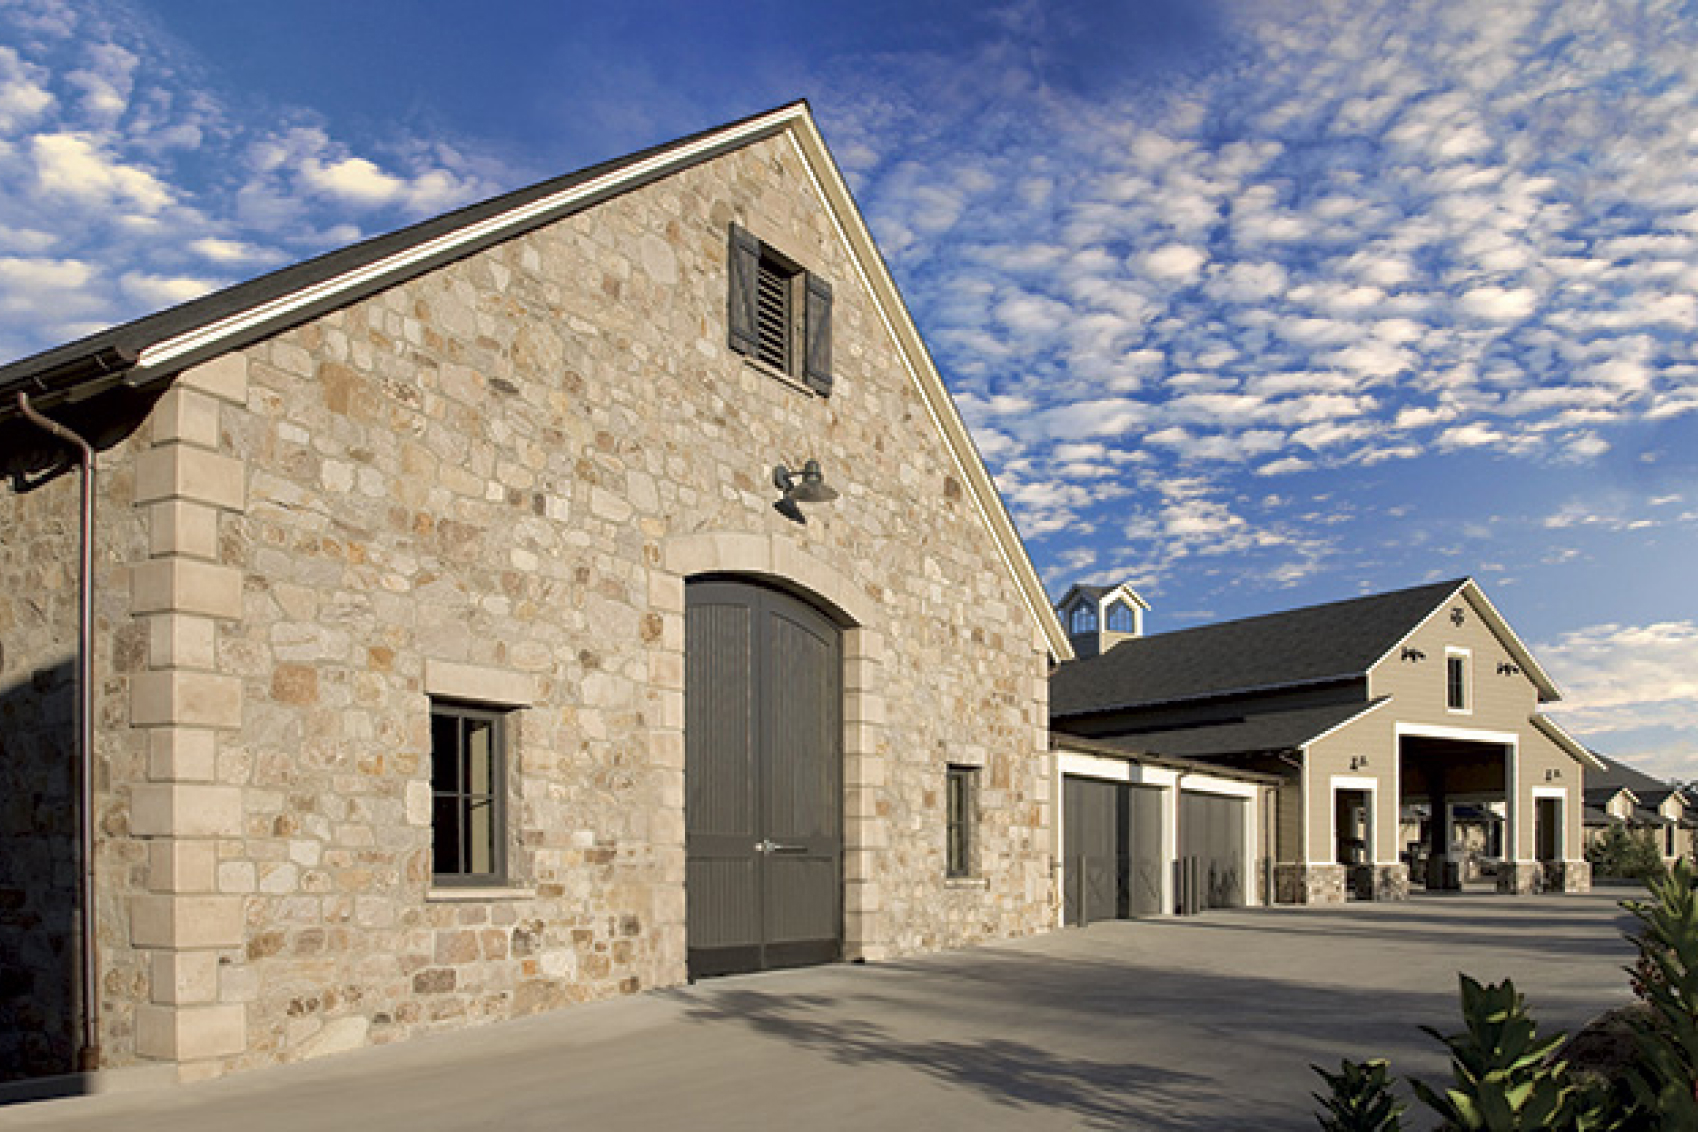 The beautiful winemaking out-buildings of Trinchero Napa Valley winery in front of a bright blue sky spotted with clouds